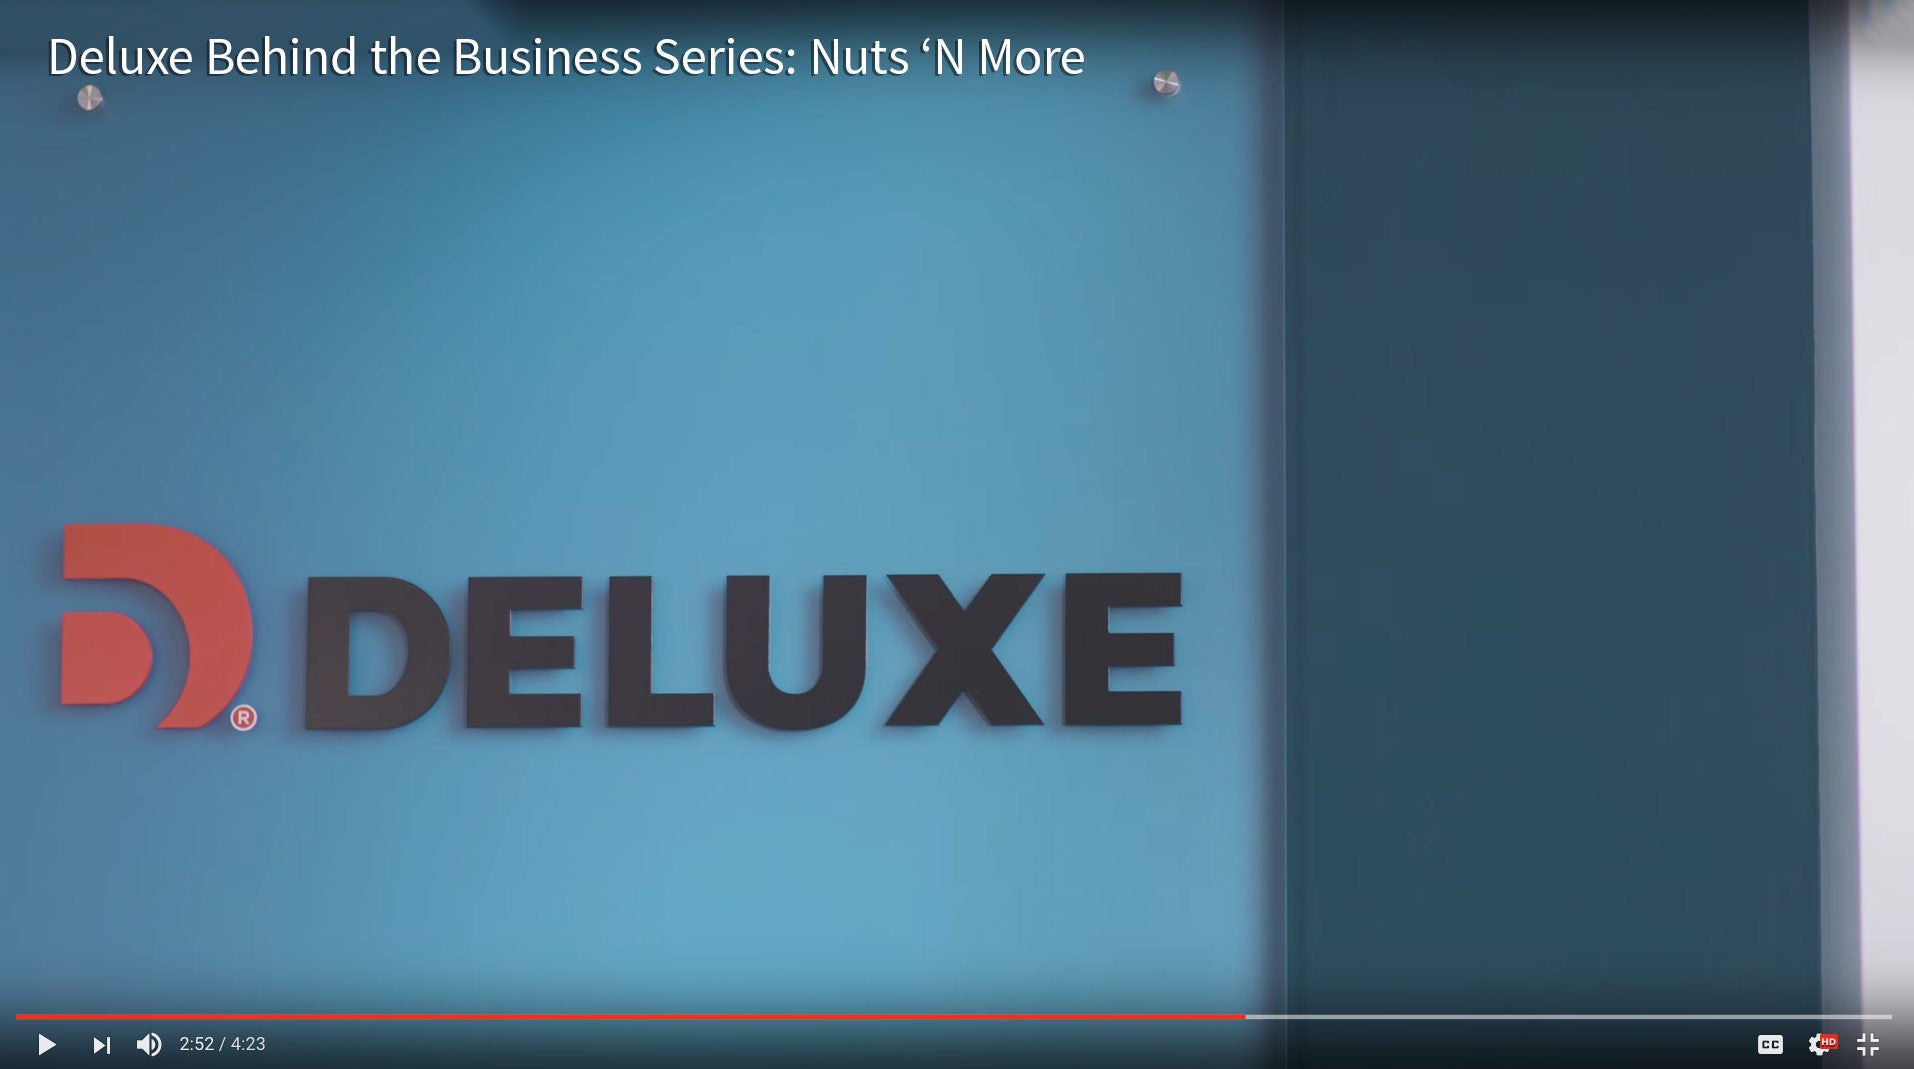 Nuts ‘N More and Robert Herjavec team up with Deluxe Marketing